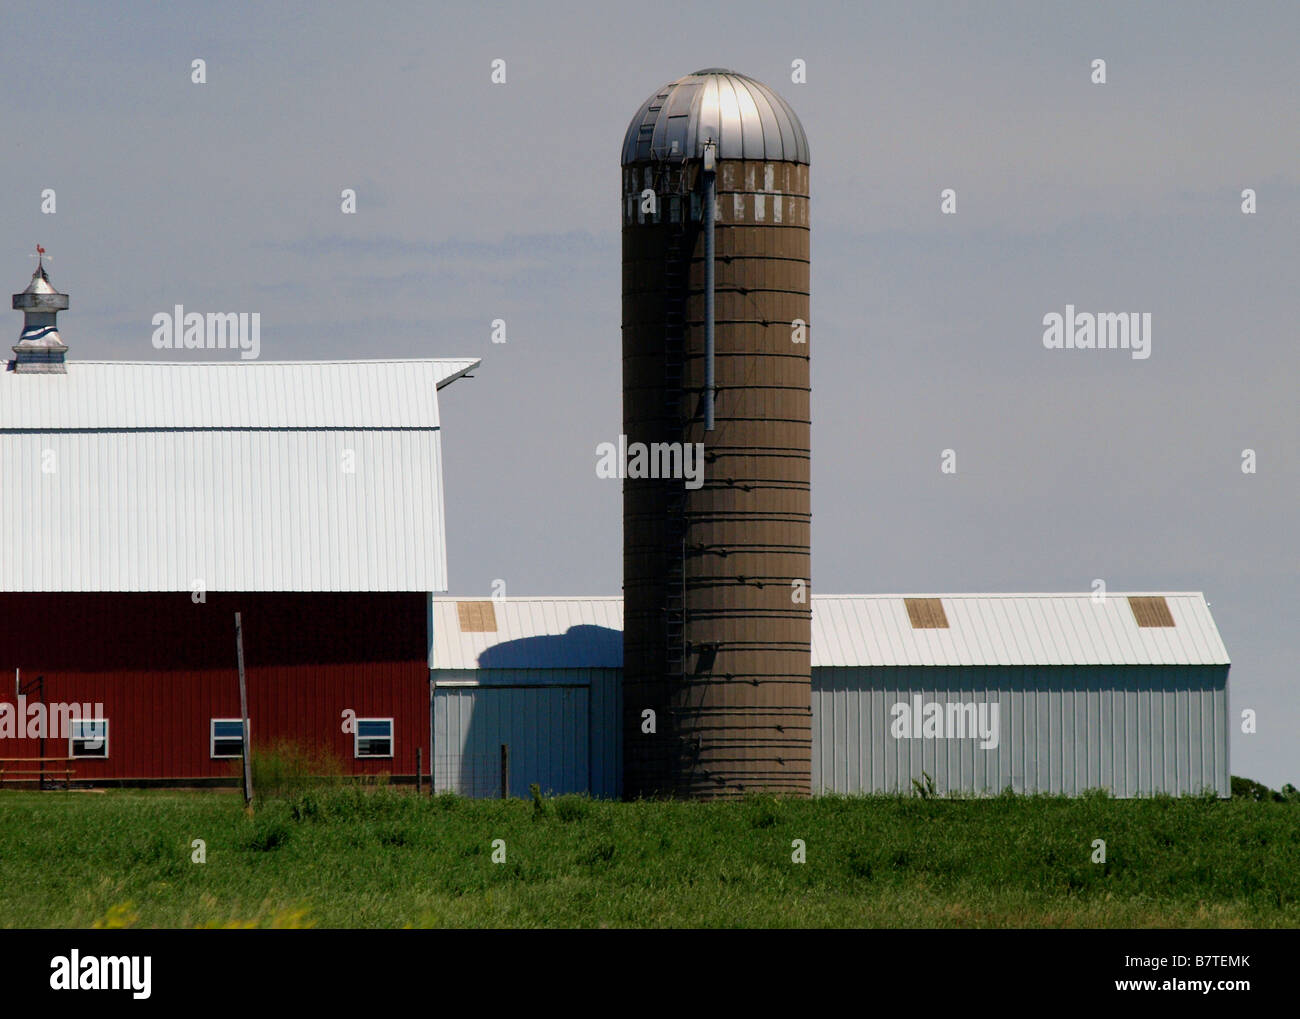 Farm scene as seen from interstate 80 in the heartland of America. Stock Photo